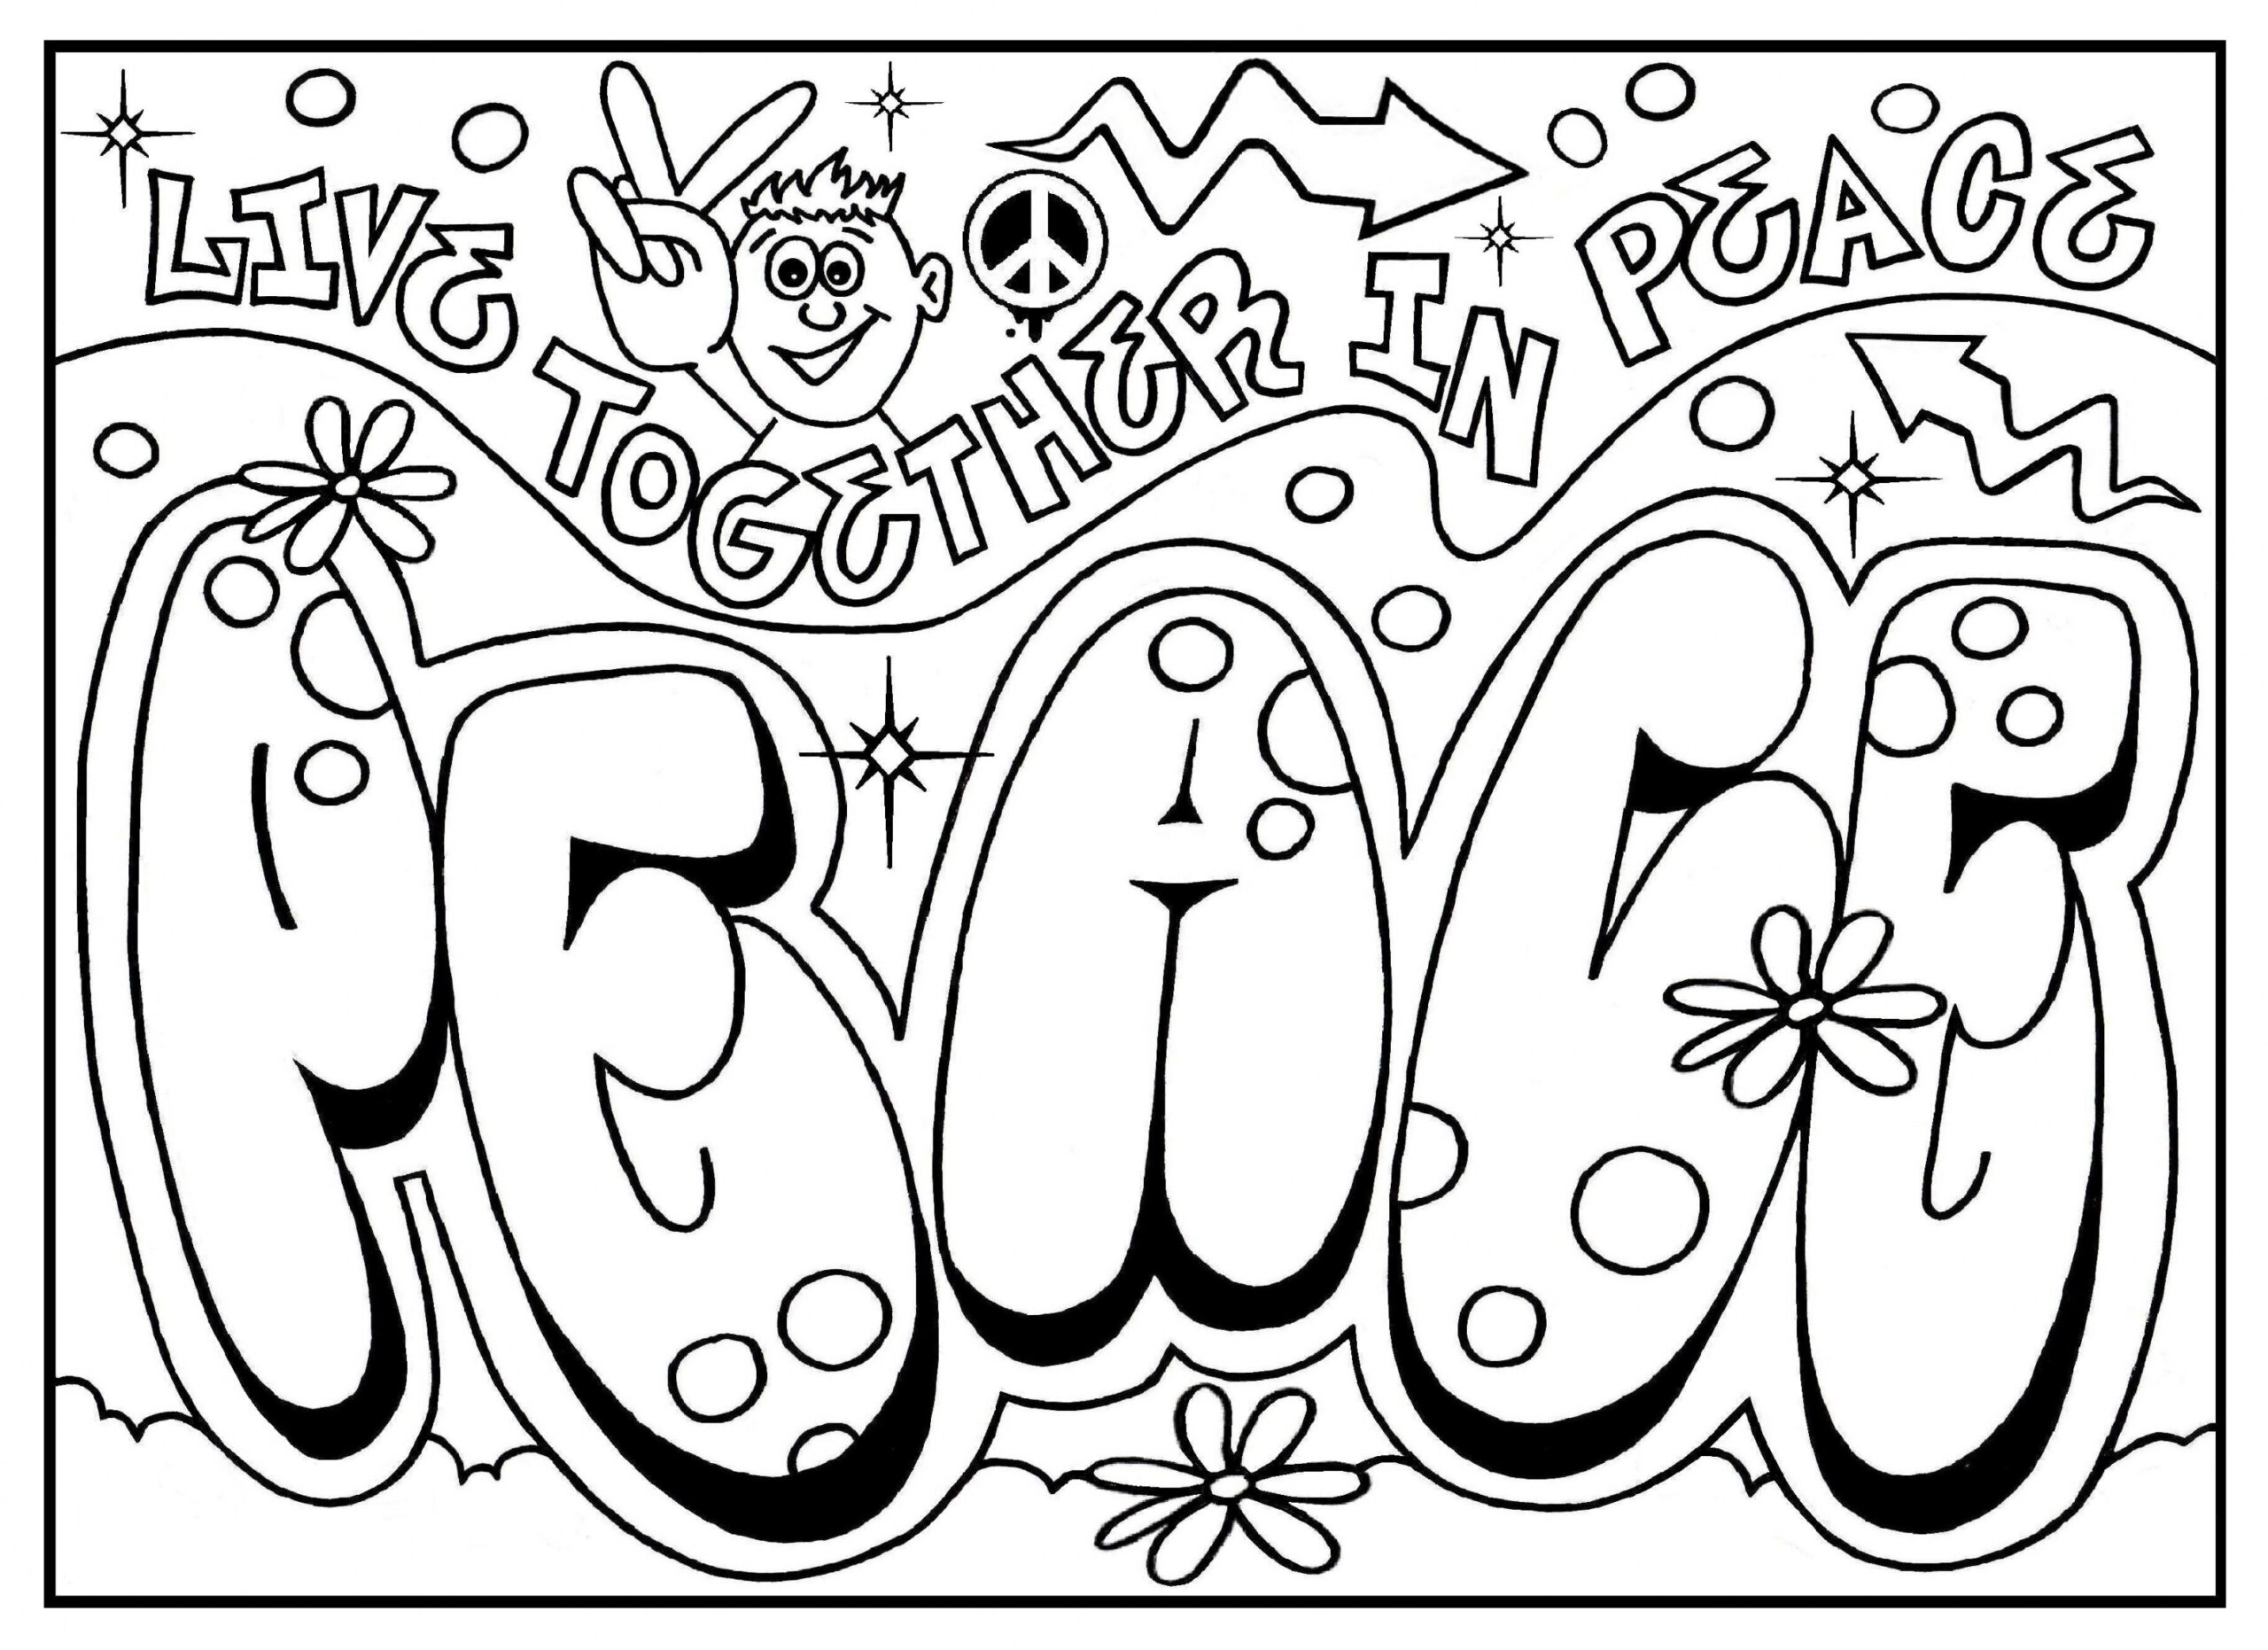 Graffiti Coloring Pages for Teens and Adults - Best Coloring Pages  - FREE Printables - Free Printable Street Art Graffiti Coloring Pages